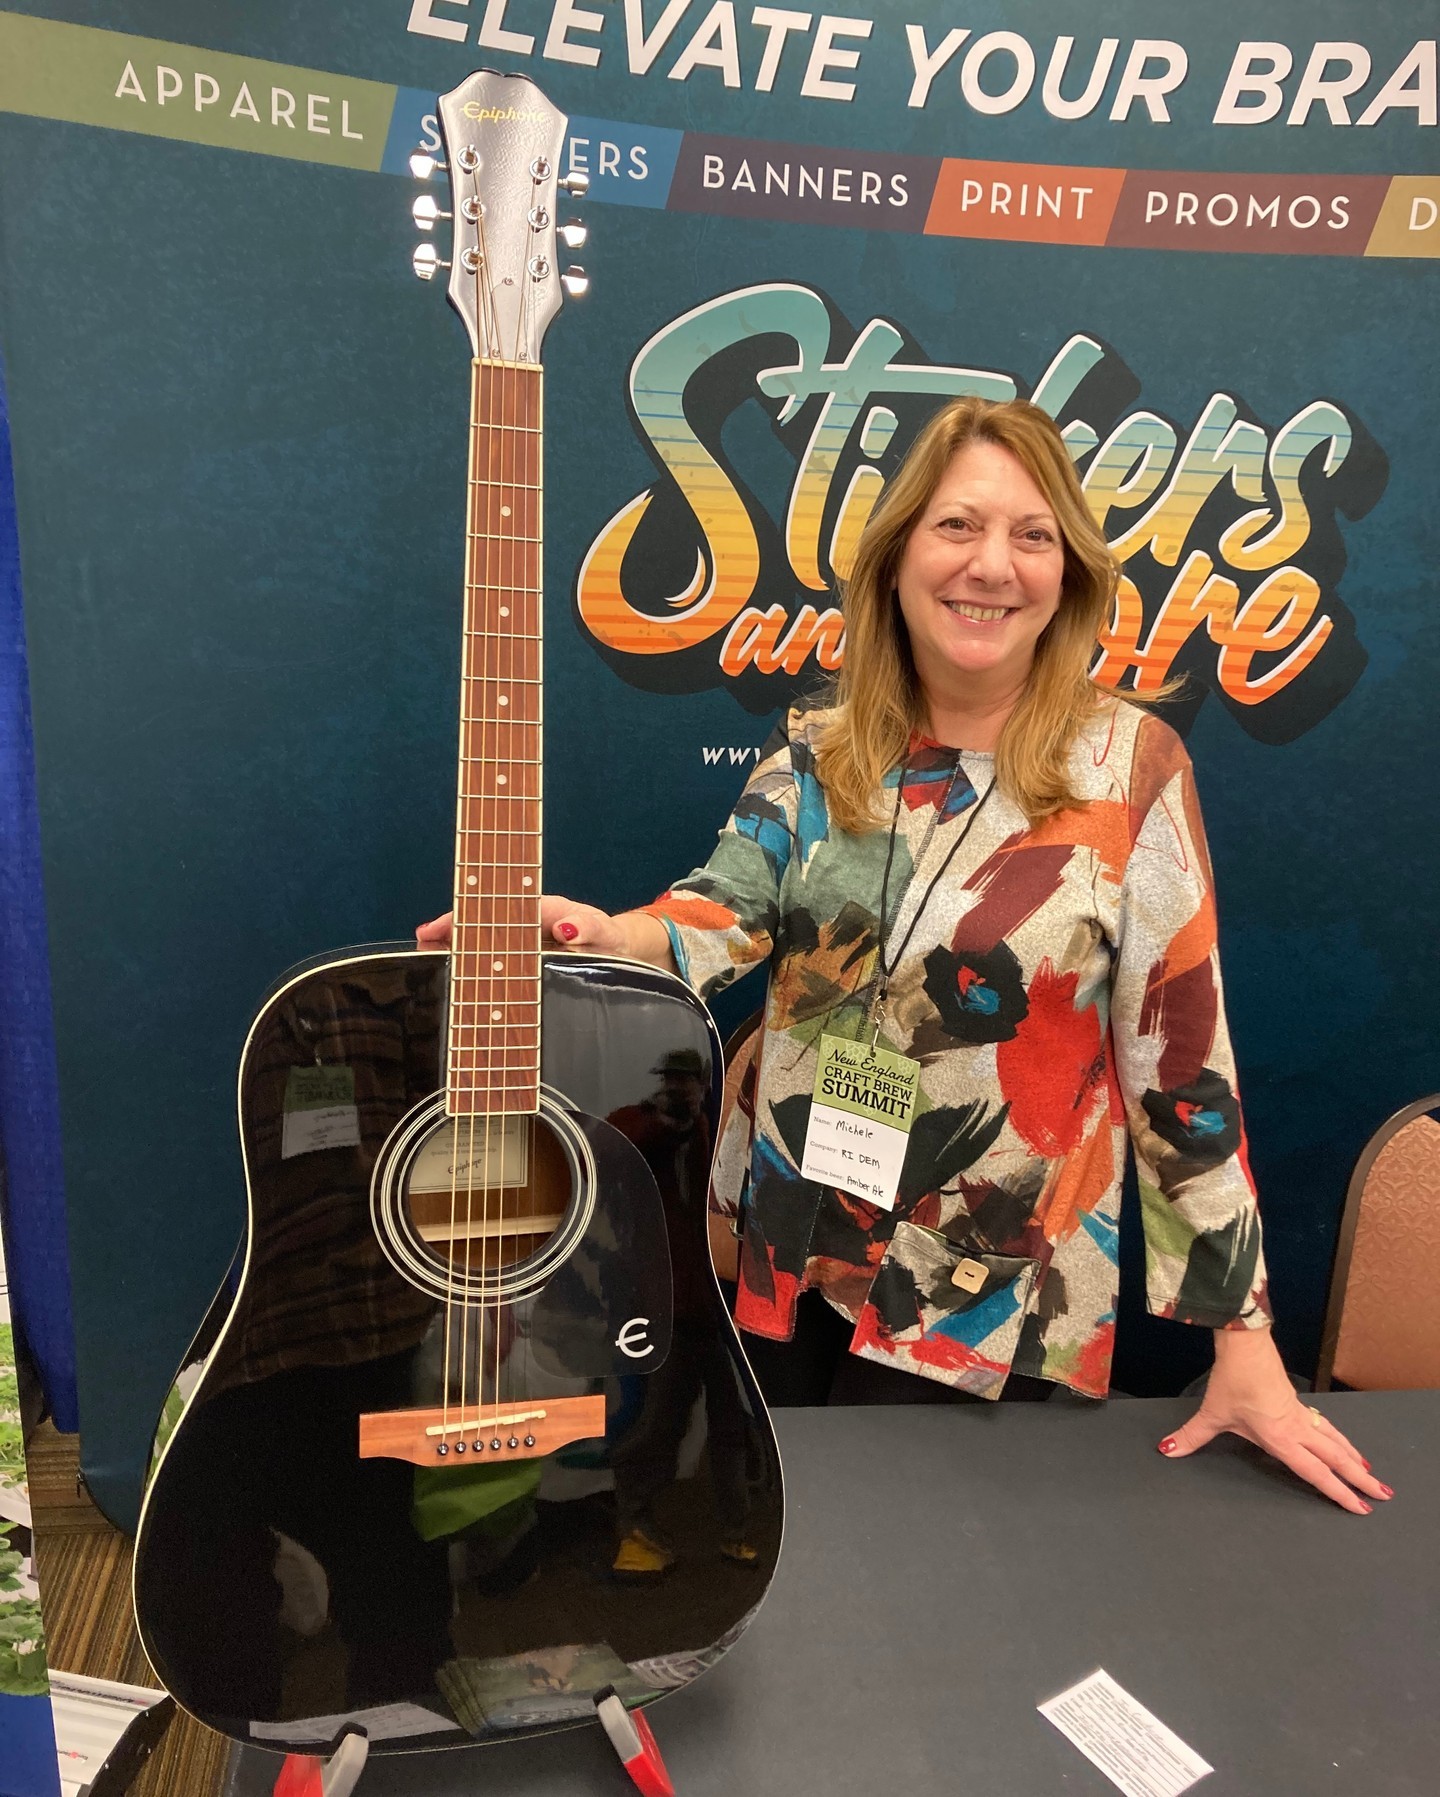 Stickers and More is known for high quality lasting products and.... giving away guitars!

Stop by our booth at any conference to enter your name into the drawing for a free guitar!
New England Brew Summit winner was Michele ⭐

#StickersAndMore
#ElevateYourBrand